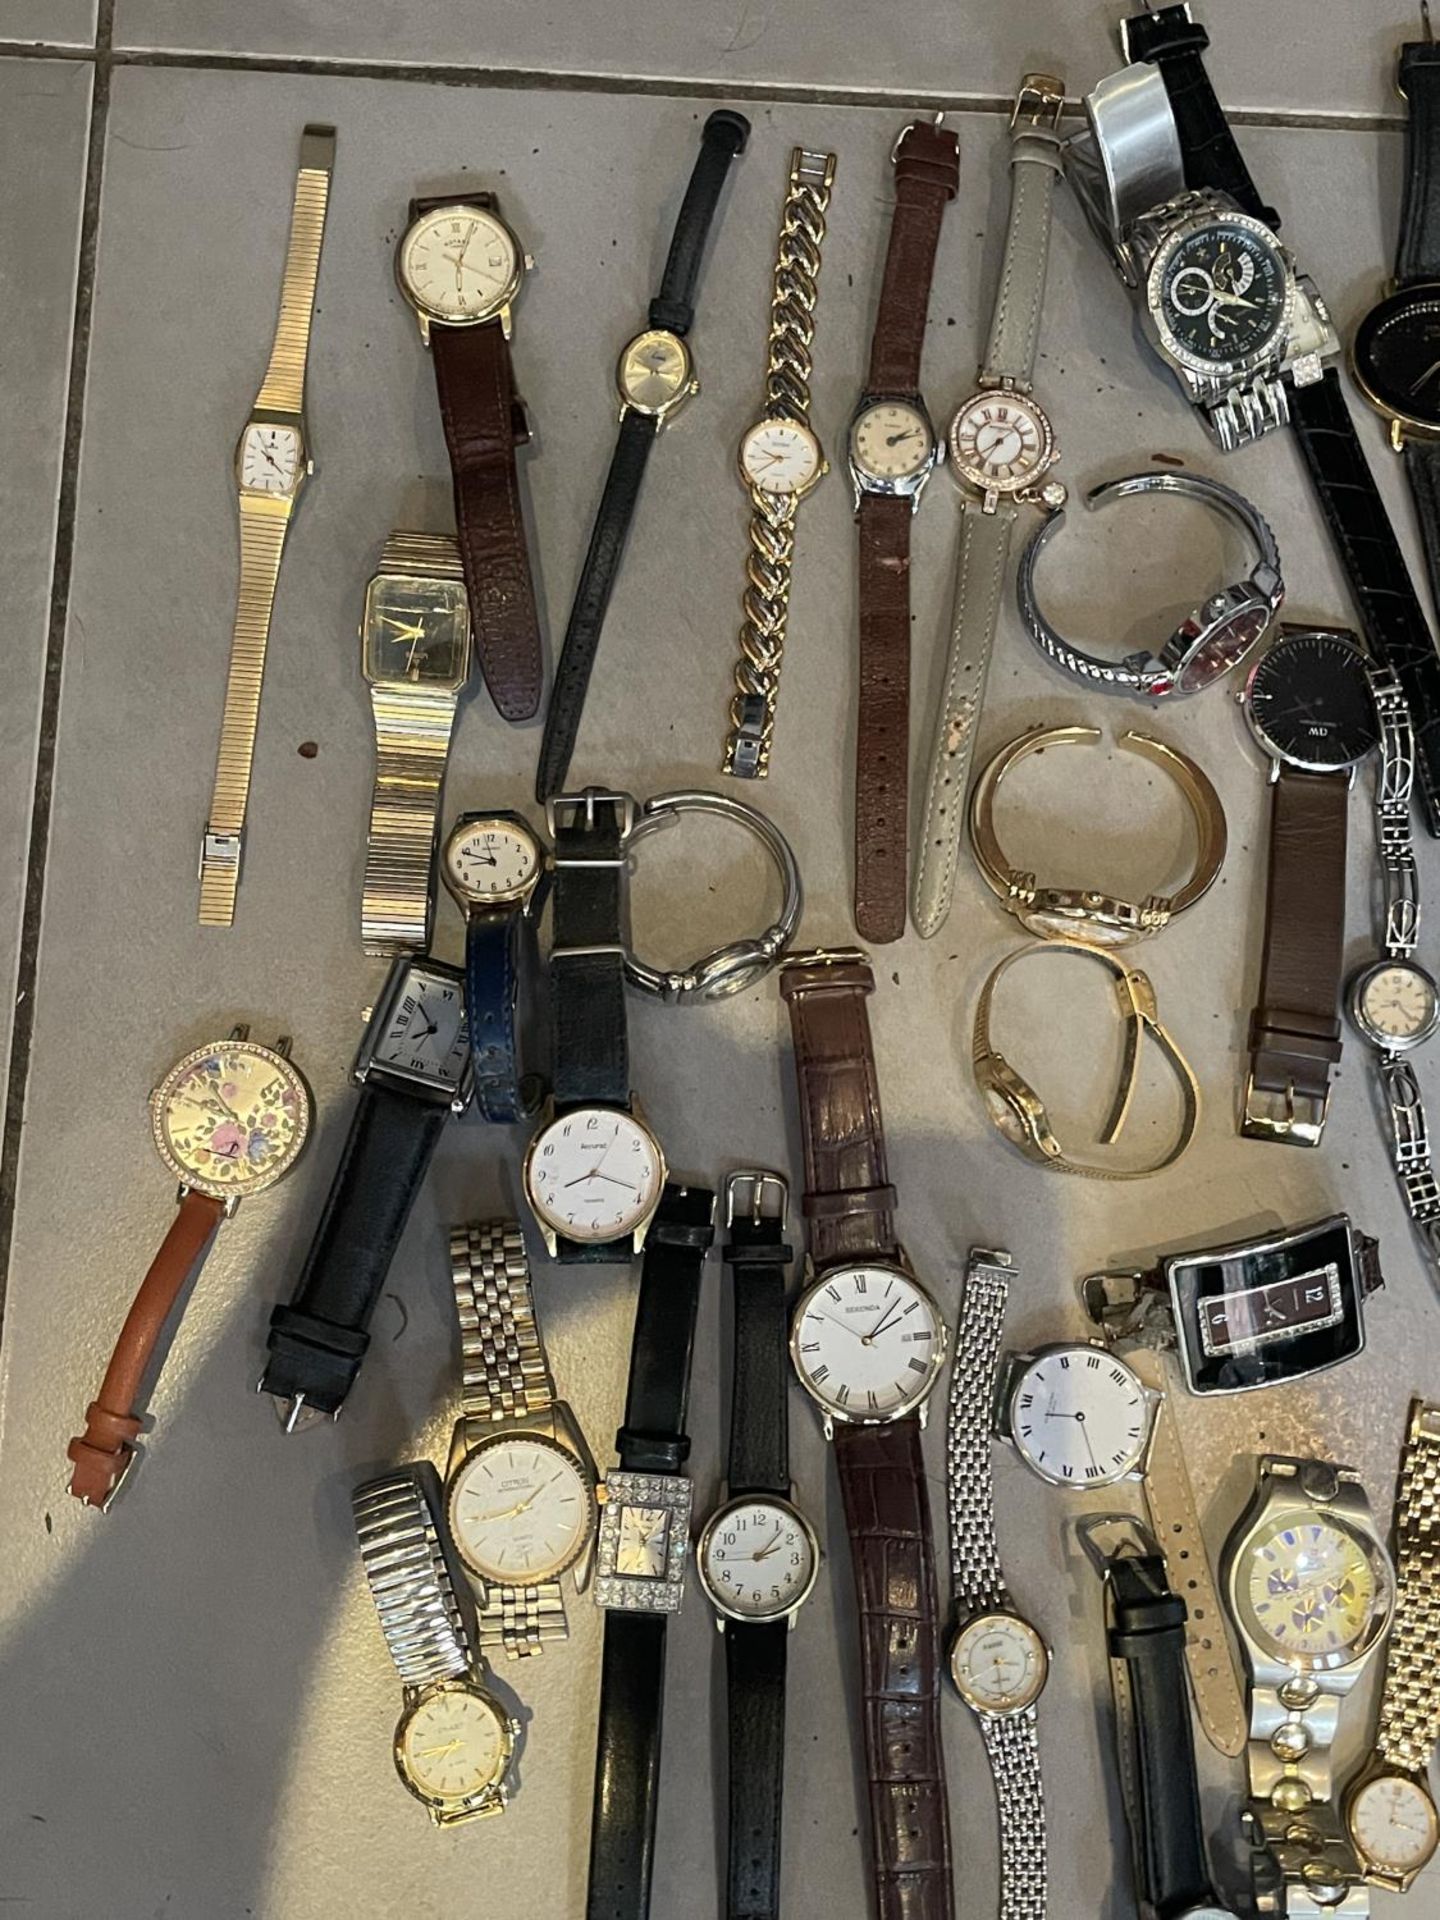 OVER FIFTY FIVE VARIOUS WRIST WATCHES TO INCLUDE ORIS, LEUBA, RAYMOND WEIL ETC - Image 2 of 4